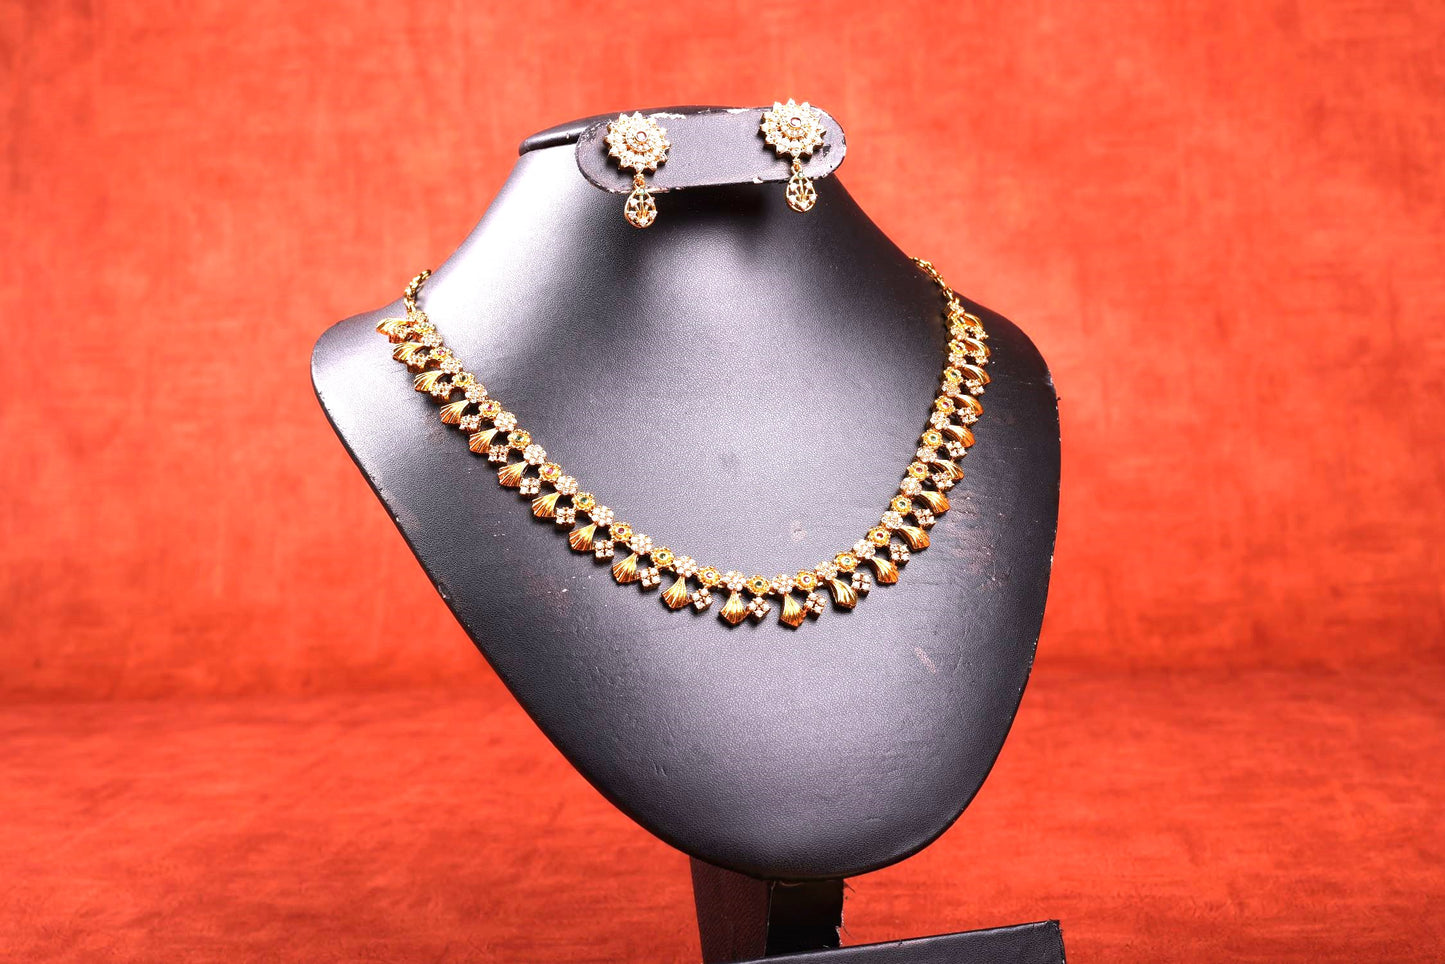 Artificial Jewelry - Necklace Set